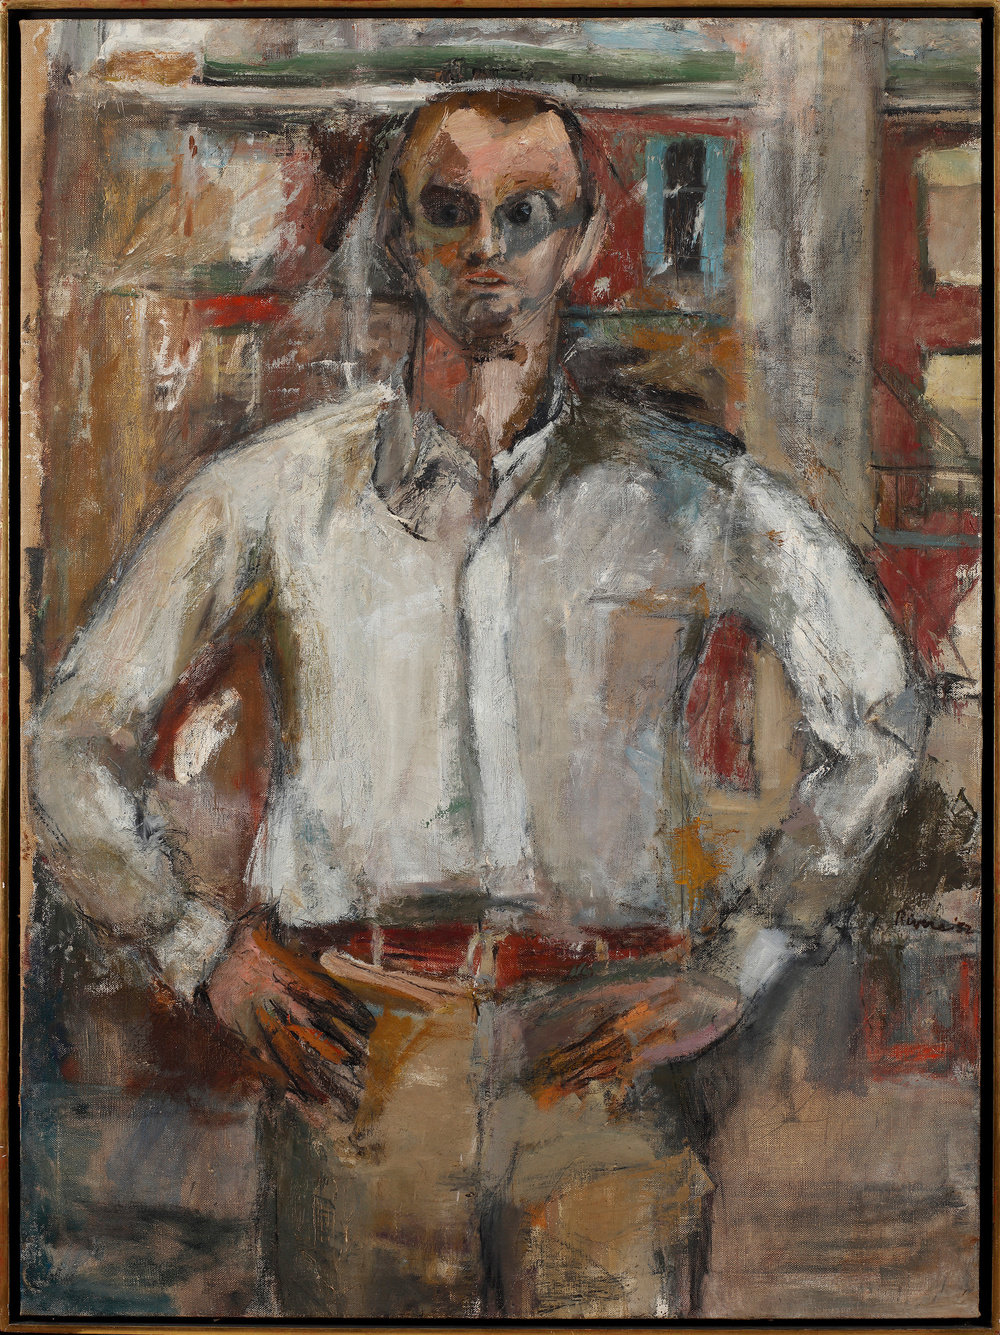 Rivers, portrait of frank o’hara, 1953, oil on canvas, 54 x 40 in., 137.2 x 101.6 cm, 314430, nos 36.546